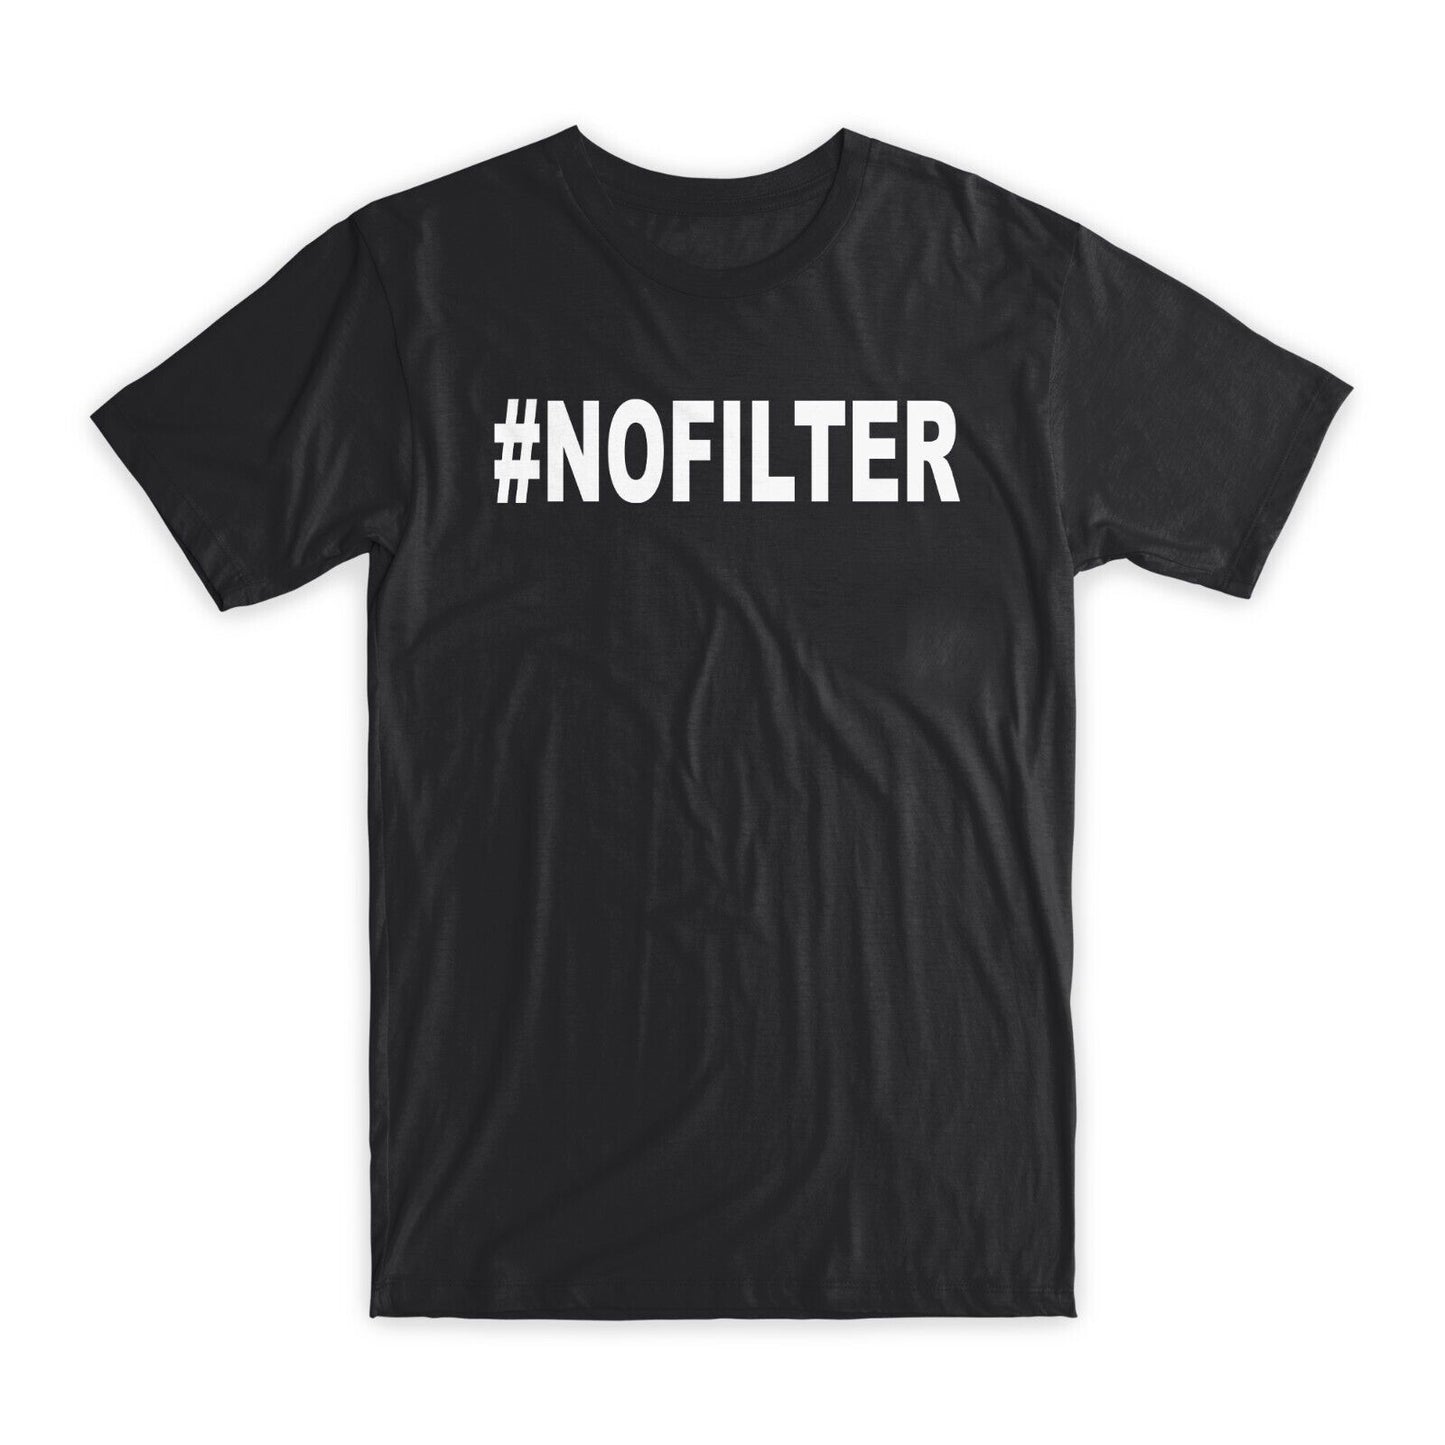 #NOFILTER Print T-Shirt Premium Soft Cotton Crew Neck Funny Tee Novelty Gift NEW